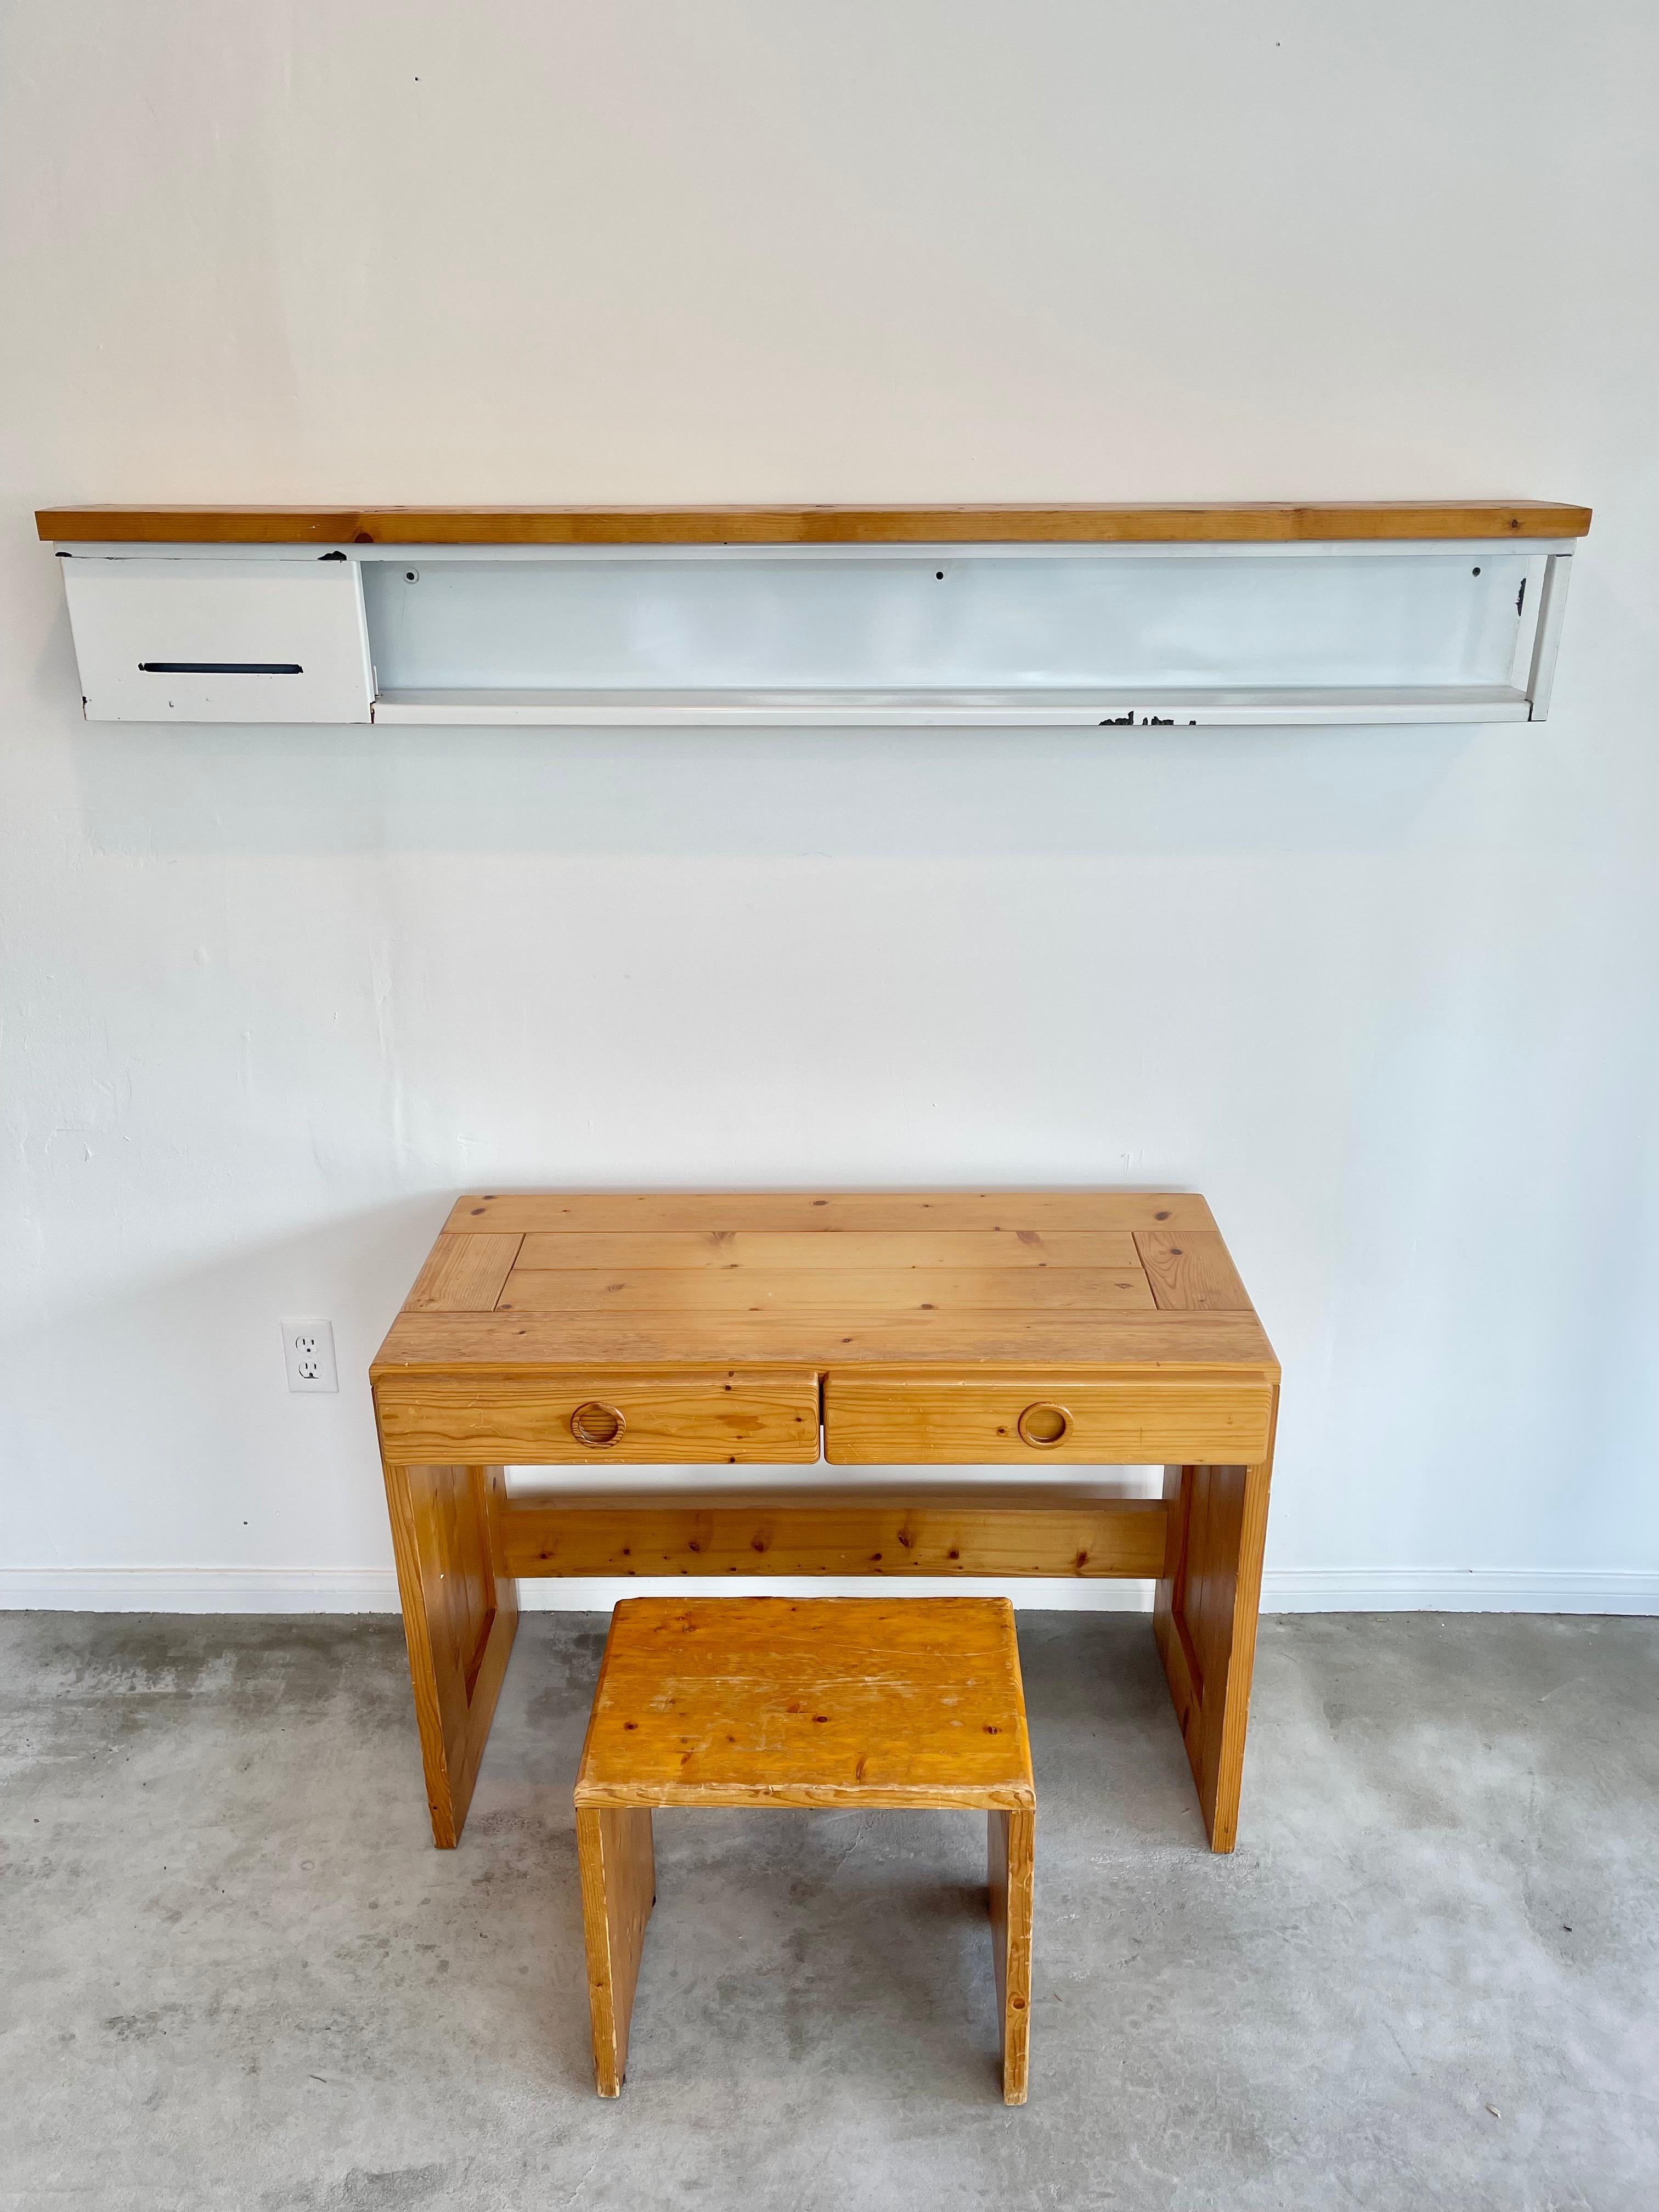 Rare Charlotte Perriand shelf made for Les Arcs ski resort. Circa 1960s. Solid slab of Pine wood secured onto a steel frame glazed in a white ceramic. Incredible patina and presence. Great vintage condition. Highly collectible piece of Charlotte